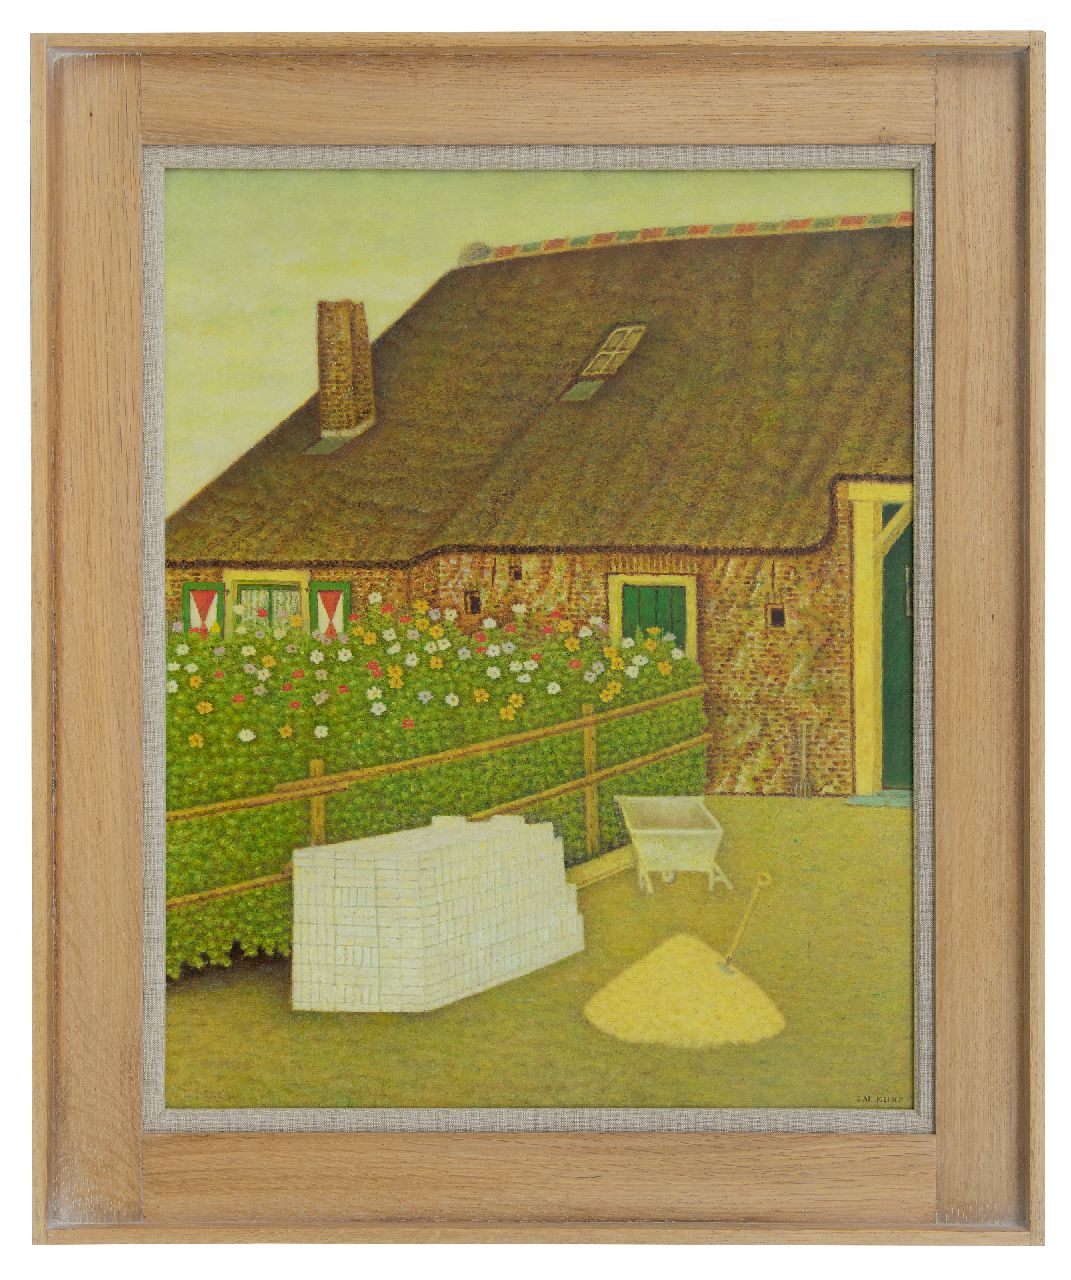 Meijer S.  | Salomon 'Sal' Meijer | Paintings offered for sale | Farm, Blaricum, oil on panel 51.0 x 41.1 cm, signed l.r. and l.l.